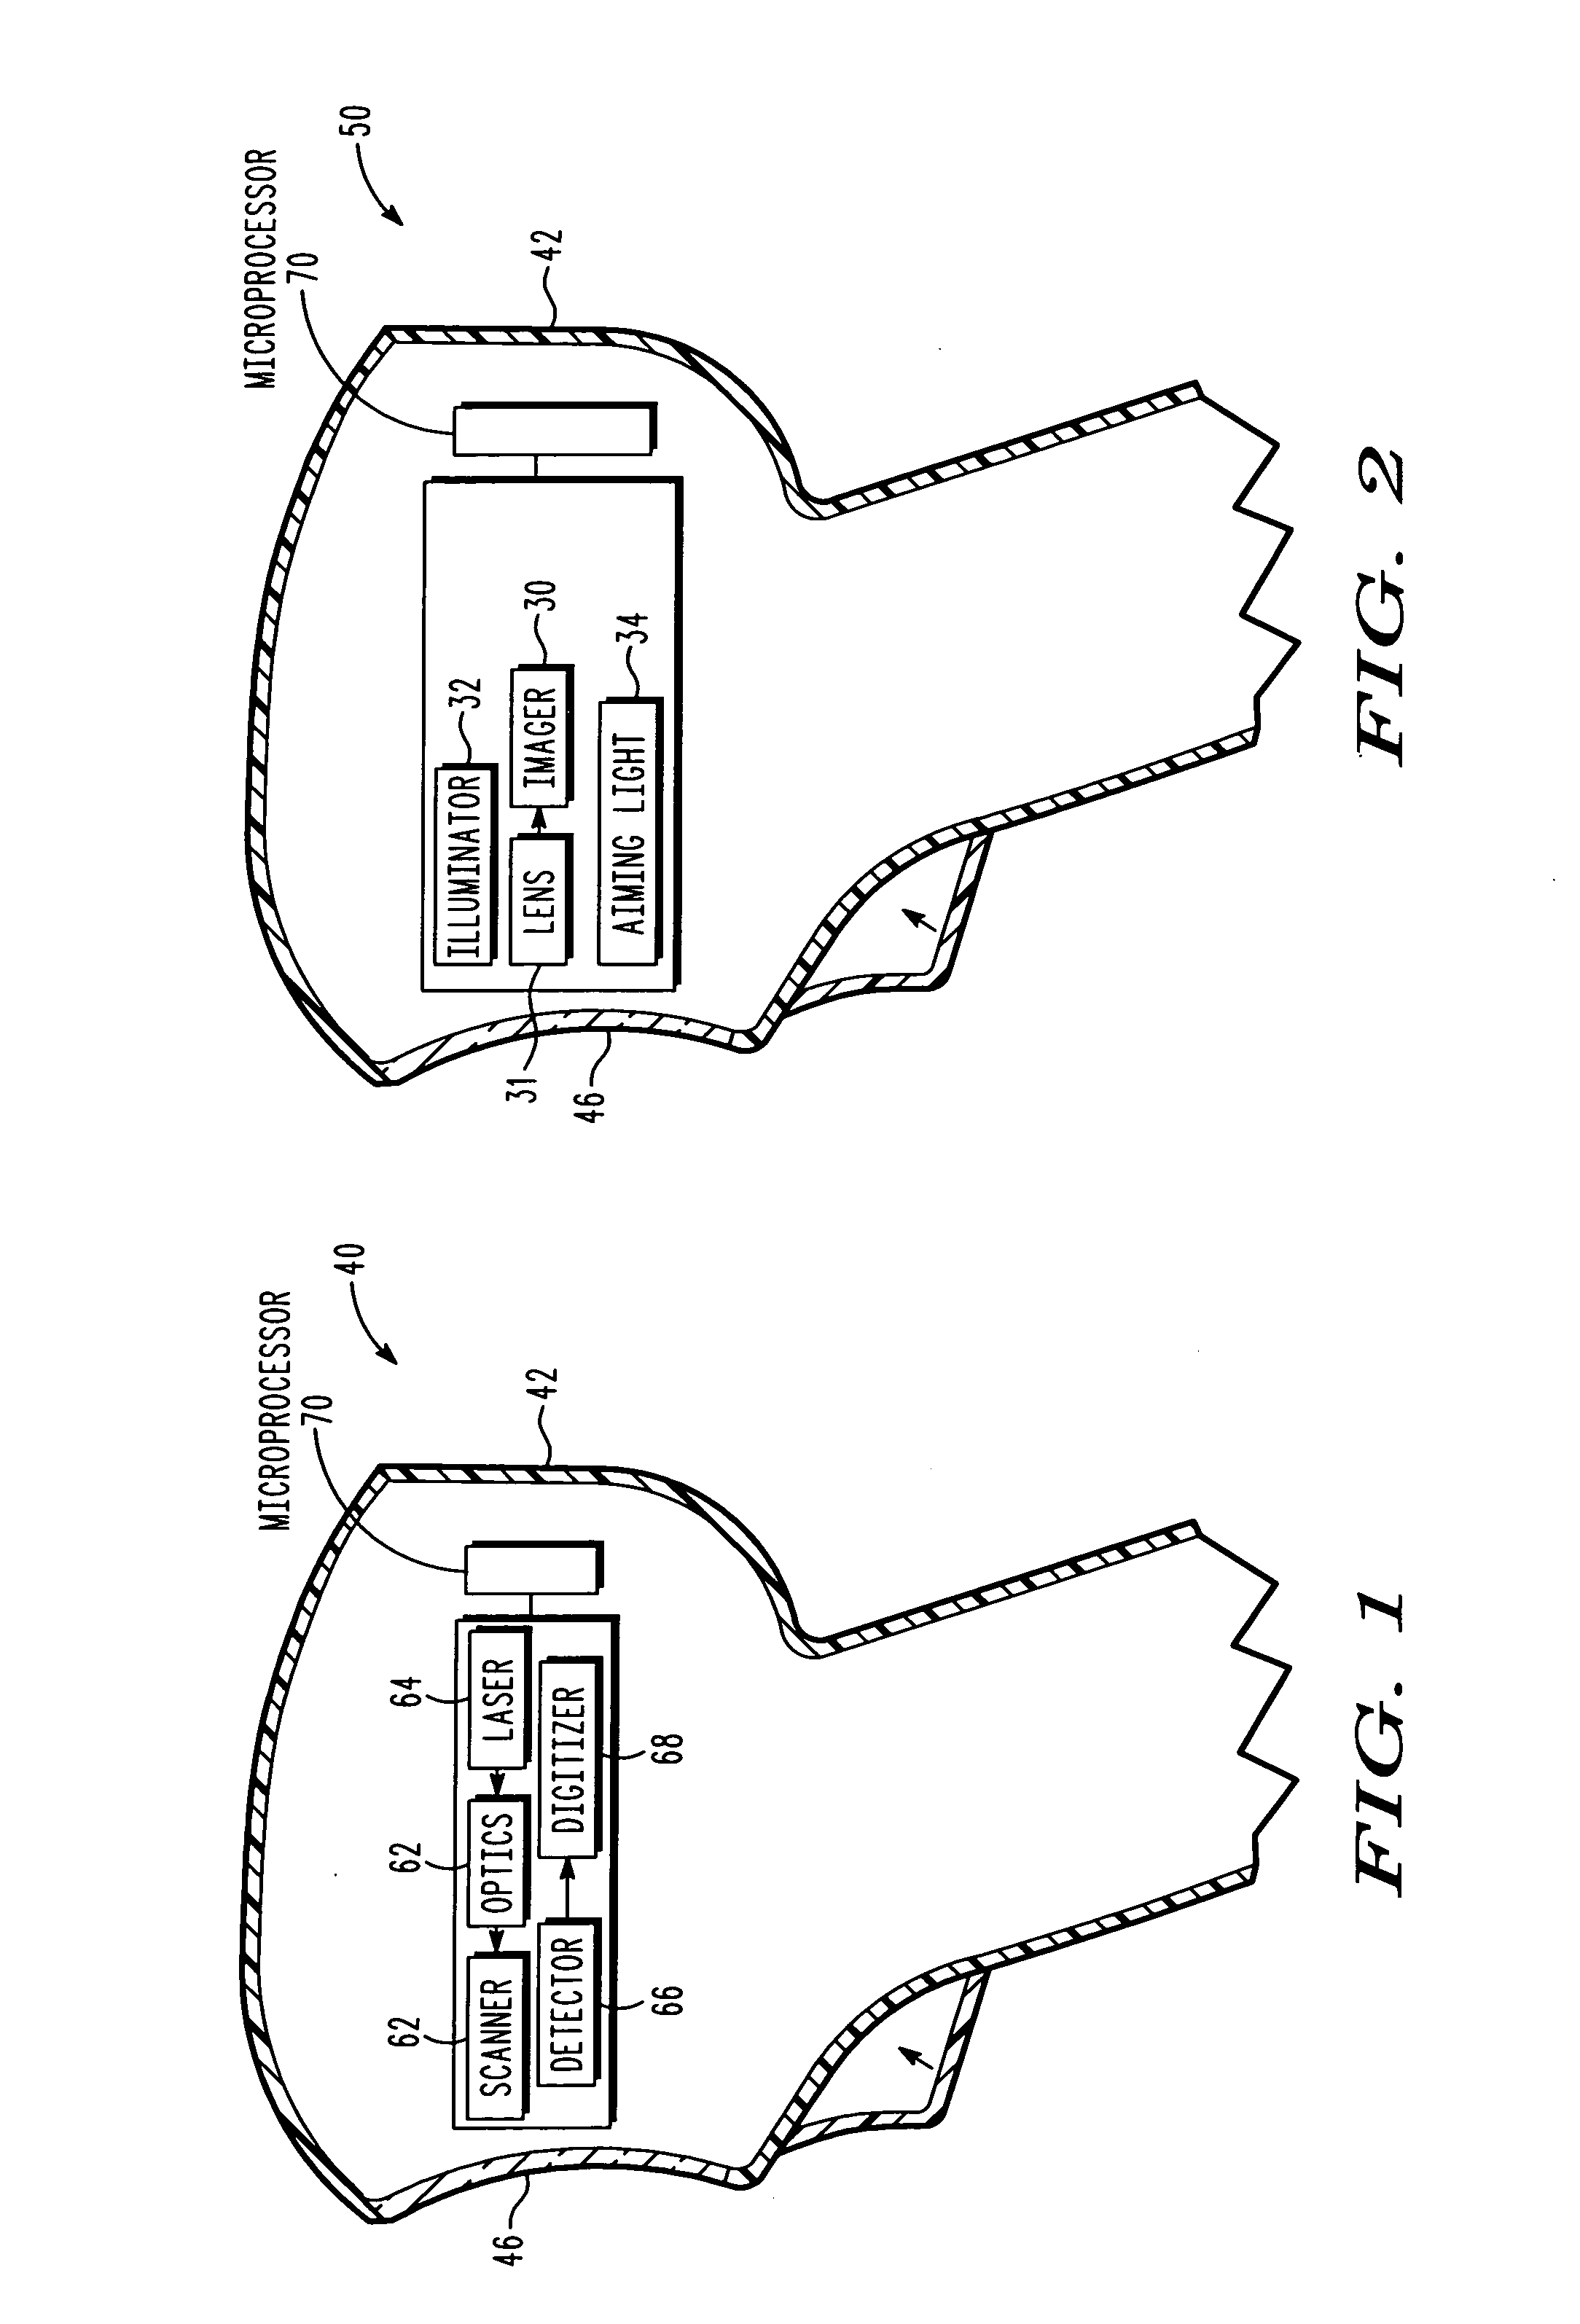 Electro-optical lens mounting assembly and method in electro-optical readers